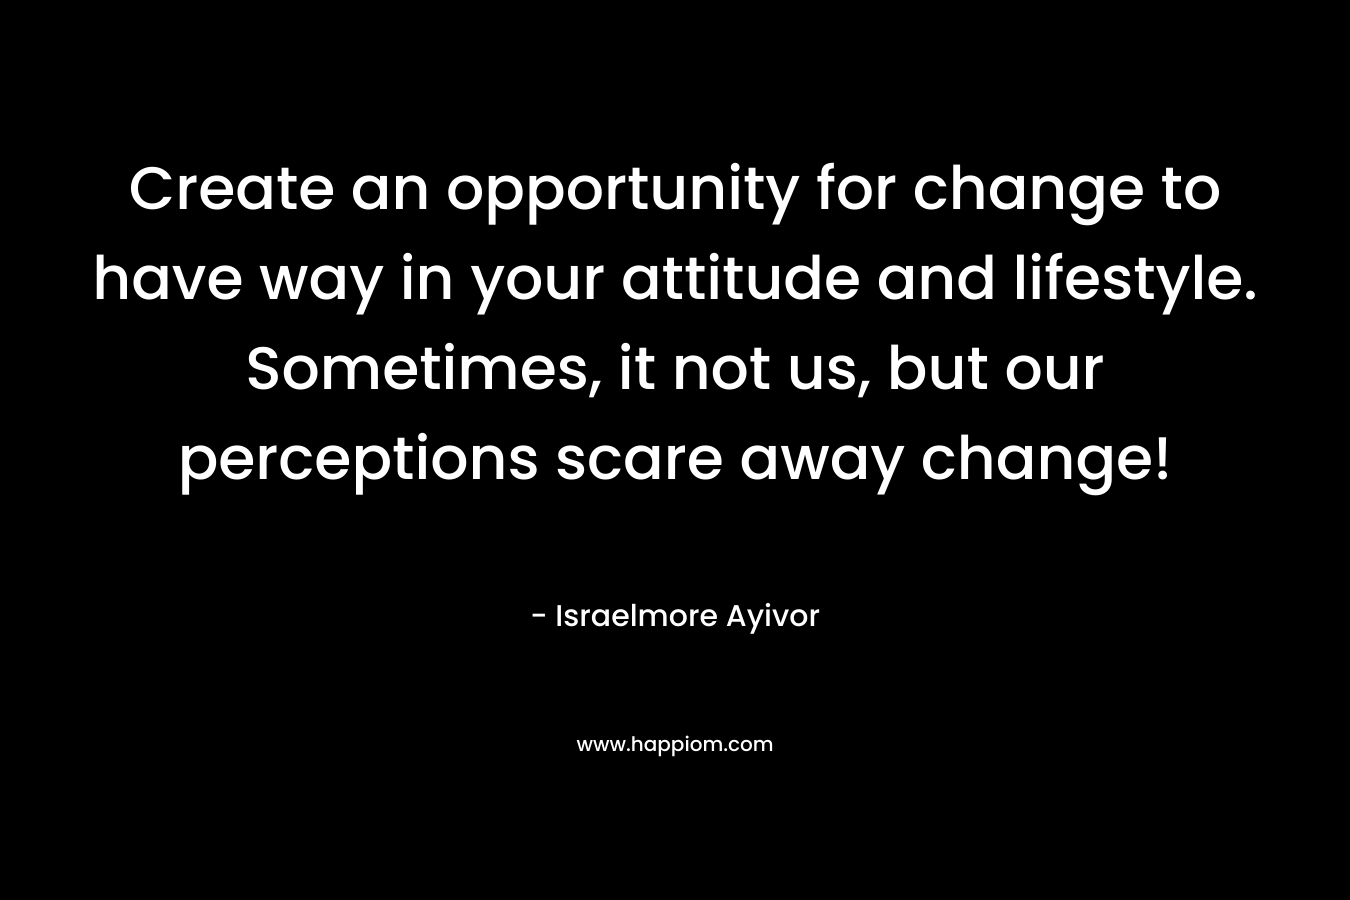 Create an opportunity for change to have way in your attitude and lifestyle. Sometimes, it not us, but our perceptions scare away change! – Israelmore Ayivor